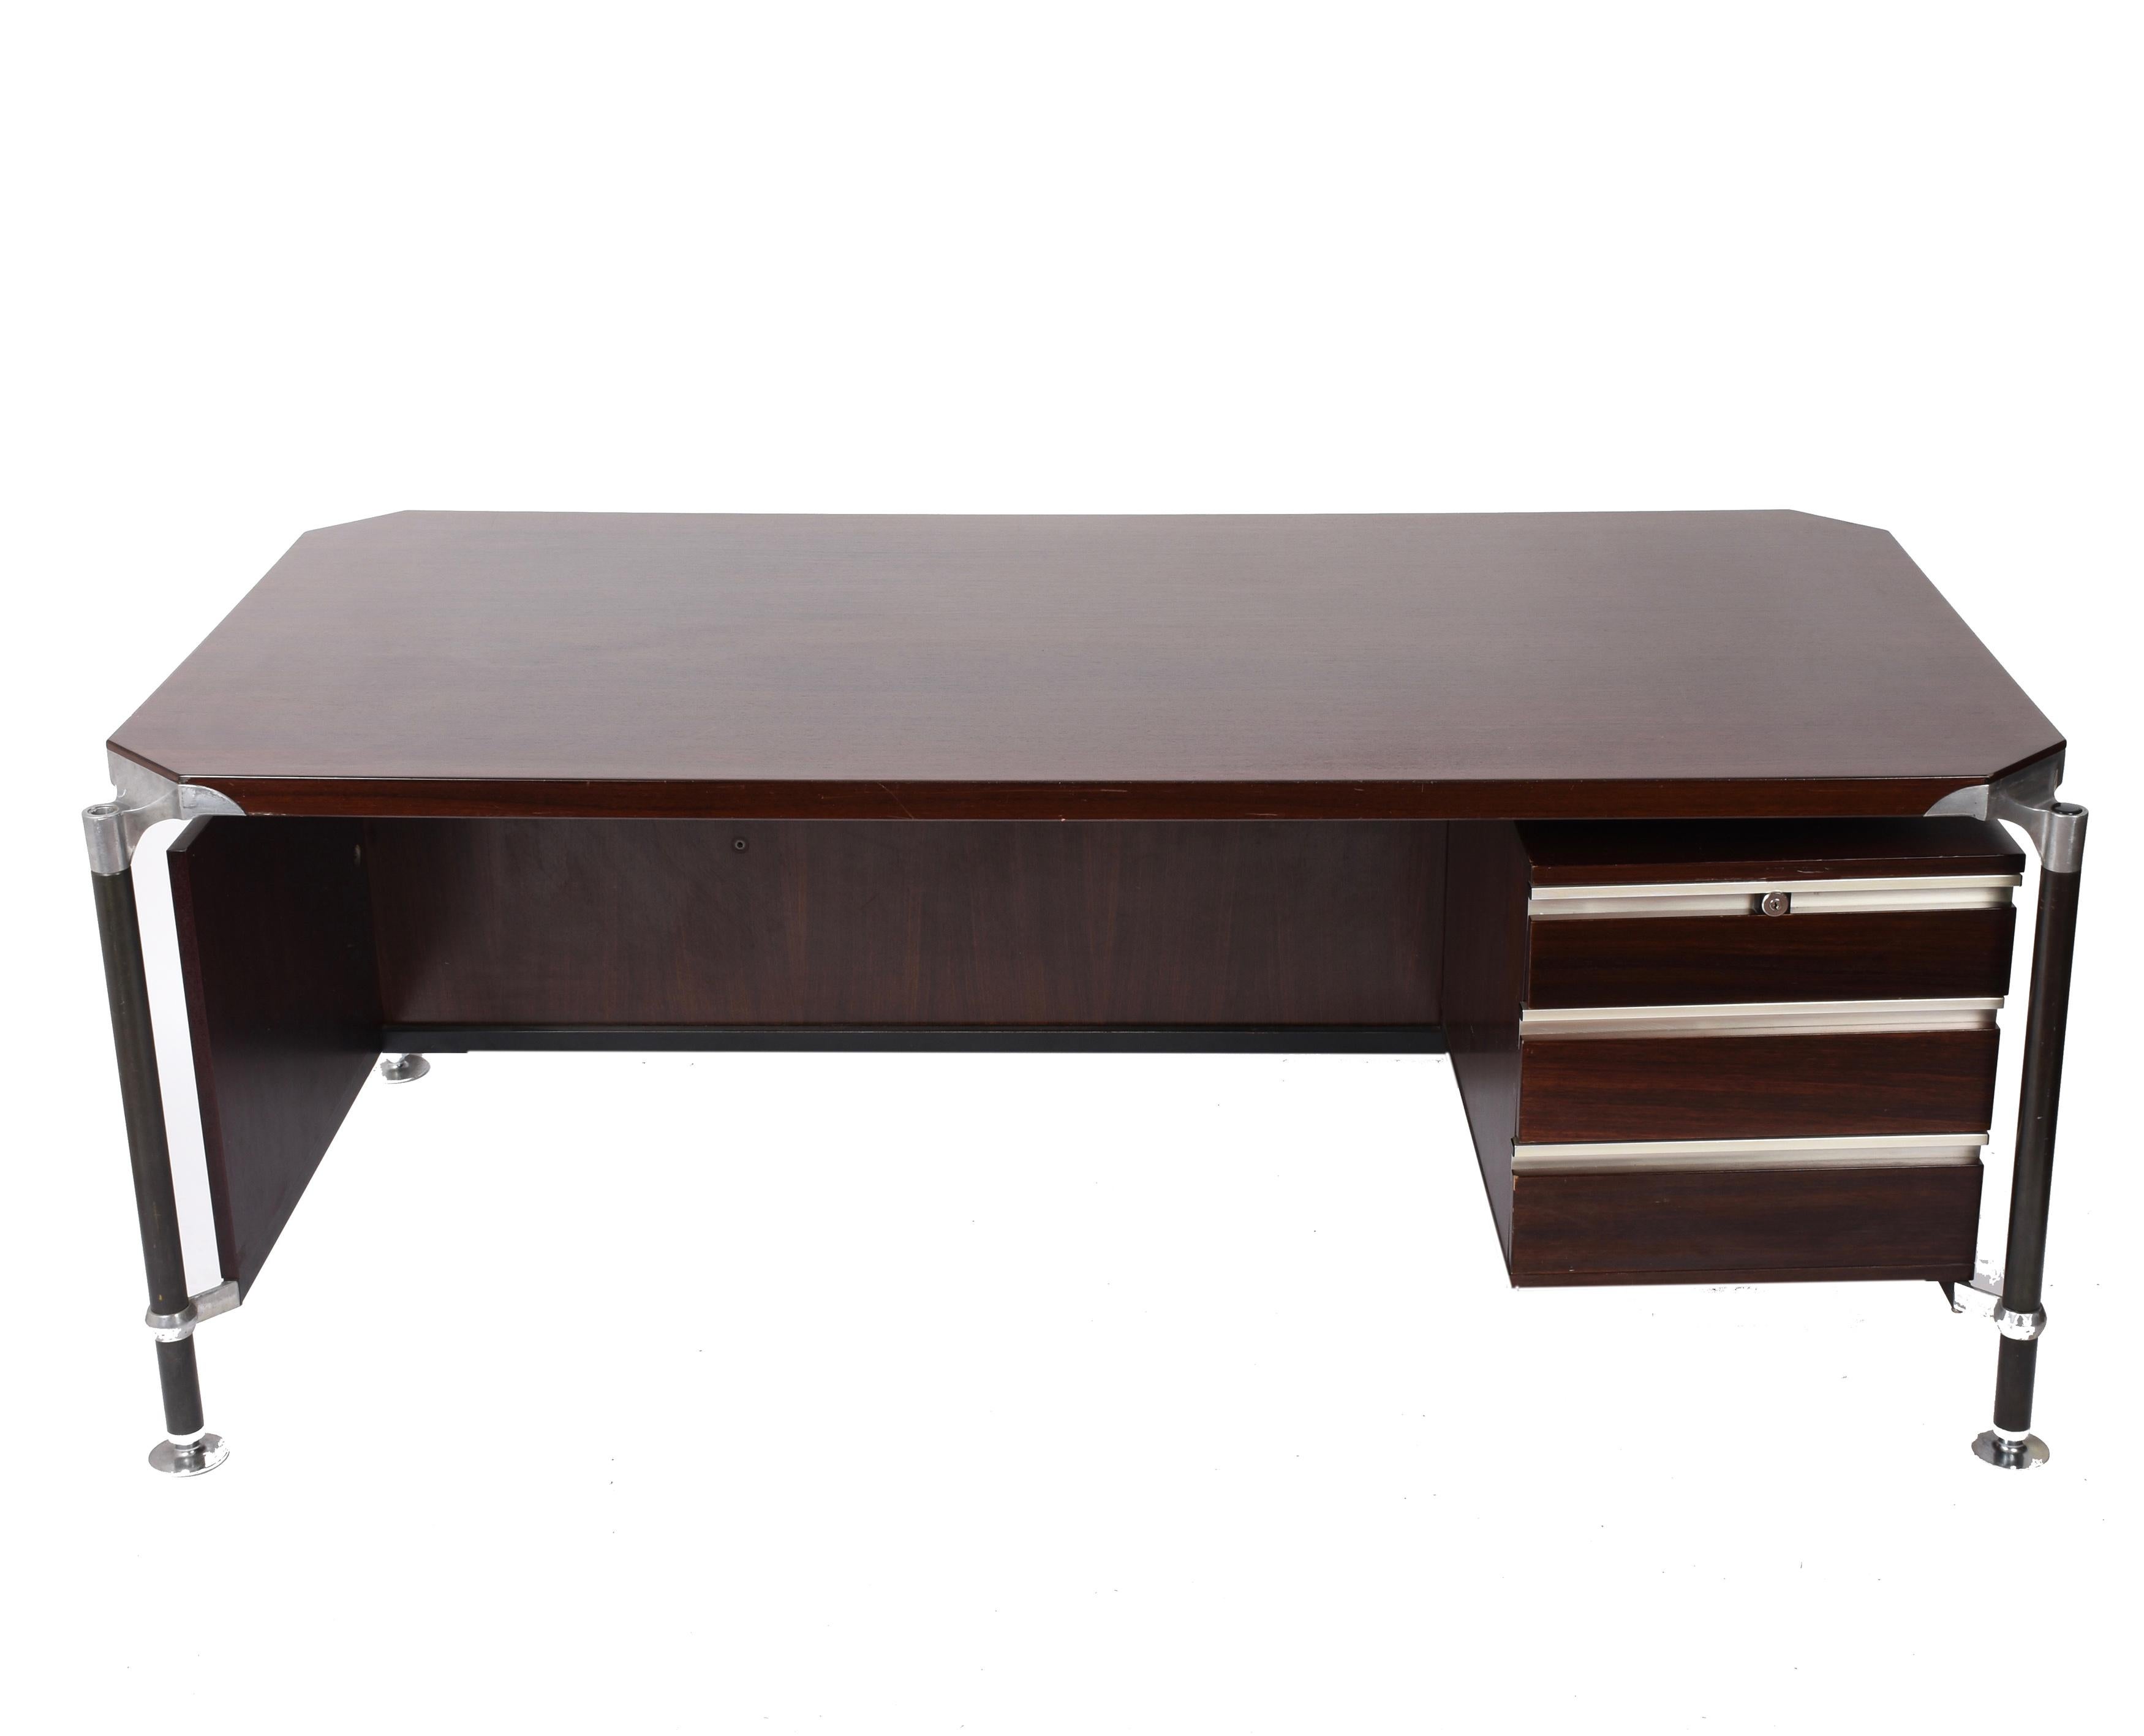 Desk designed by Luisa and Ico Parisi made in 1958 for MIM (Mobili Italiani Moderni) this desk combines excellent design with durable construction. A great example of Italian modernist design! Beautiful wood with three drawers on the left. Steel and